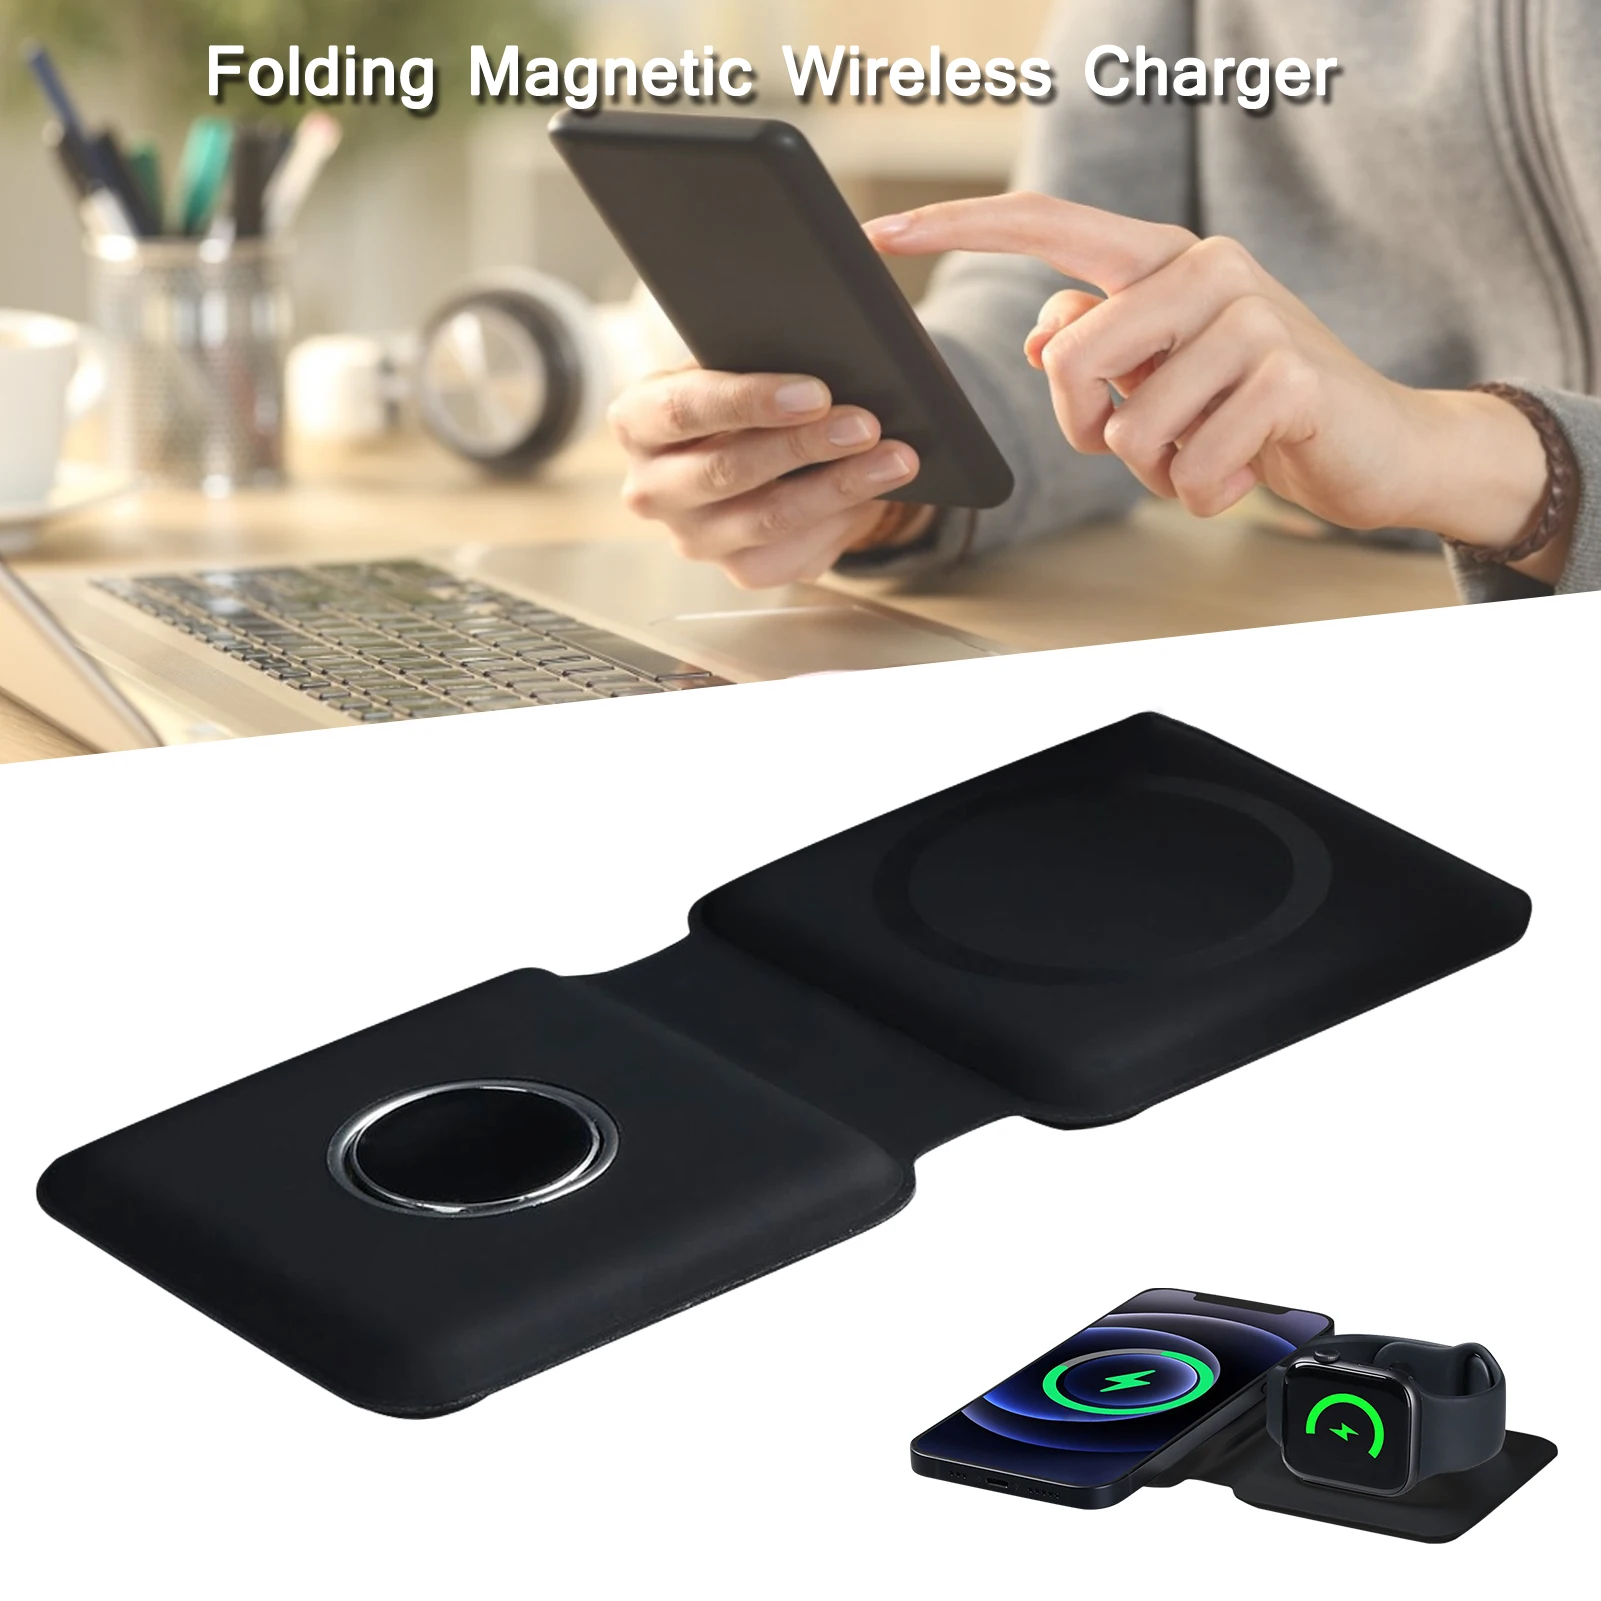 

New 3 In1 Dual Magnetic Wireless Charger For IPhone12 /Pro/Pro Max/Mini Magsafes Charger 15W Fast Charging For AirPods Watch